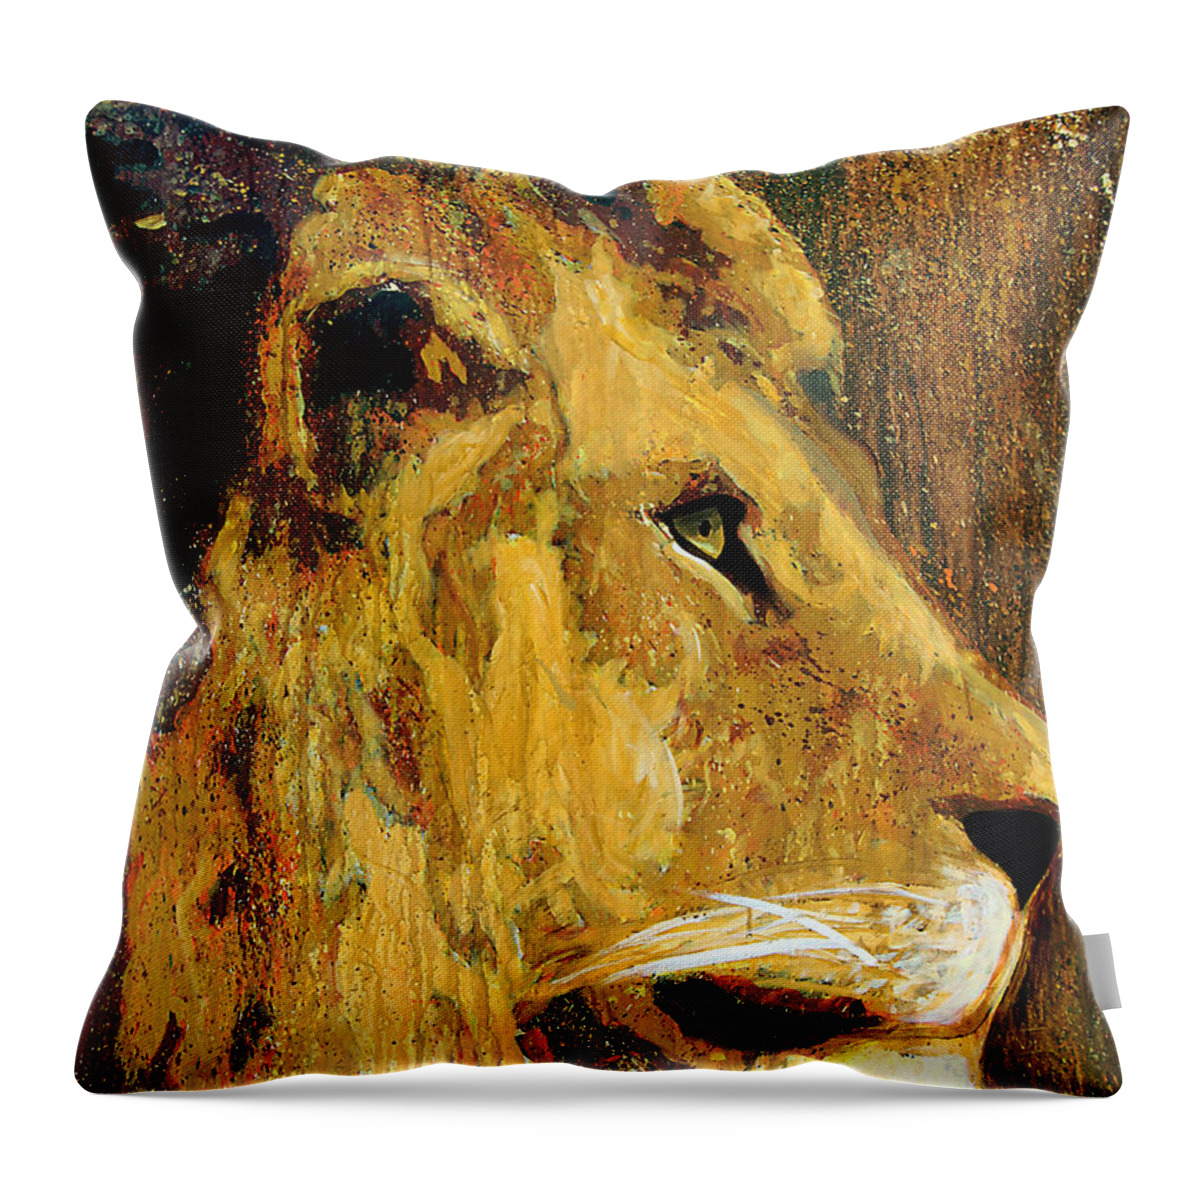 King Of The Jungle Throw Pillow featuring the painting Lion by Steve Gamba